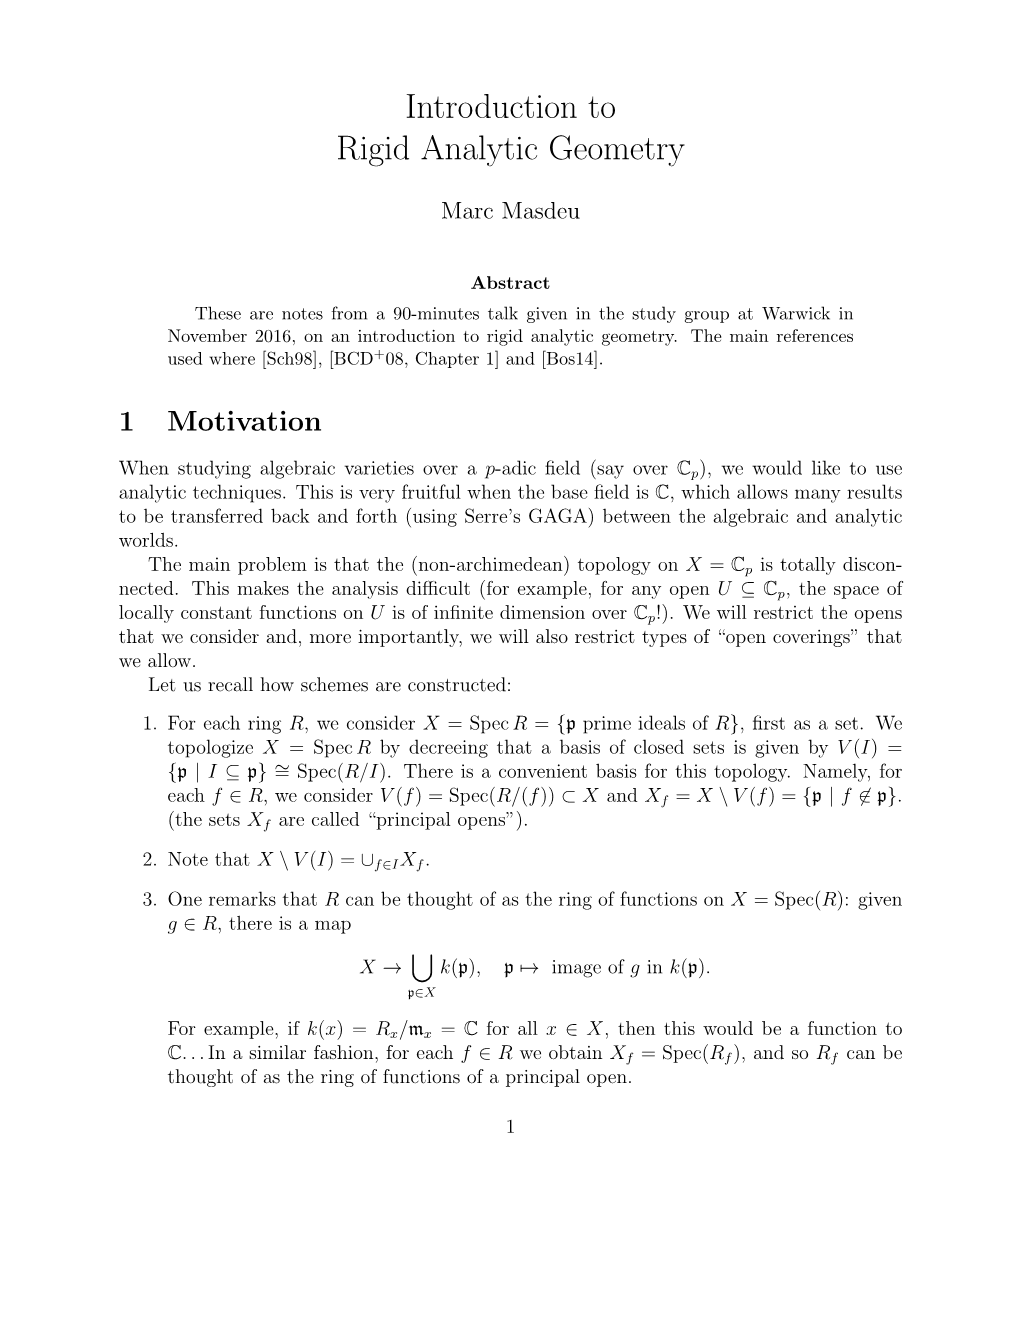 Introduction to Rigid Analytic Geometry